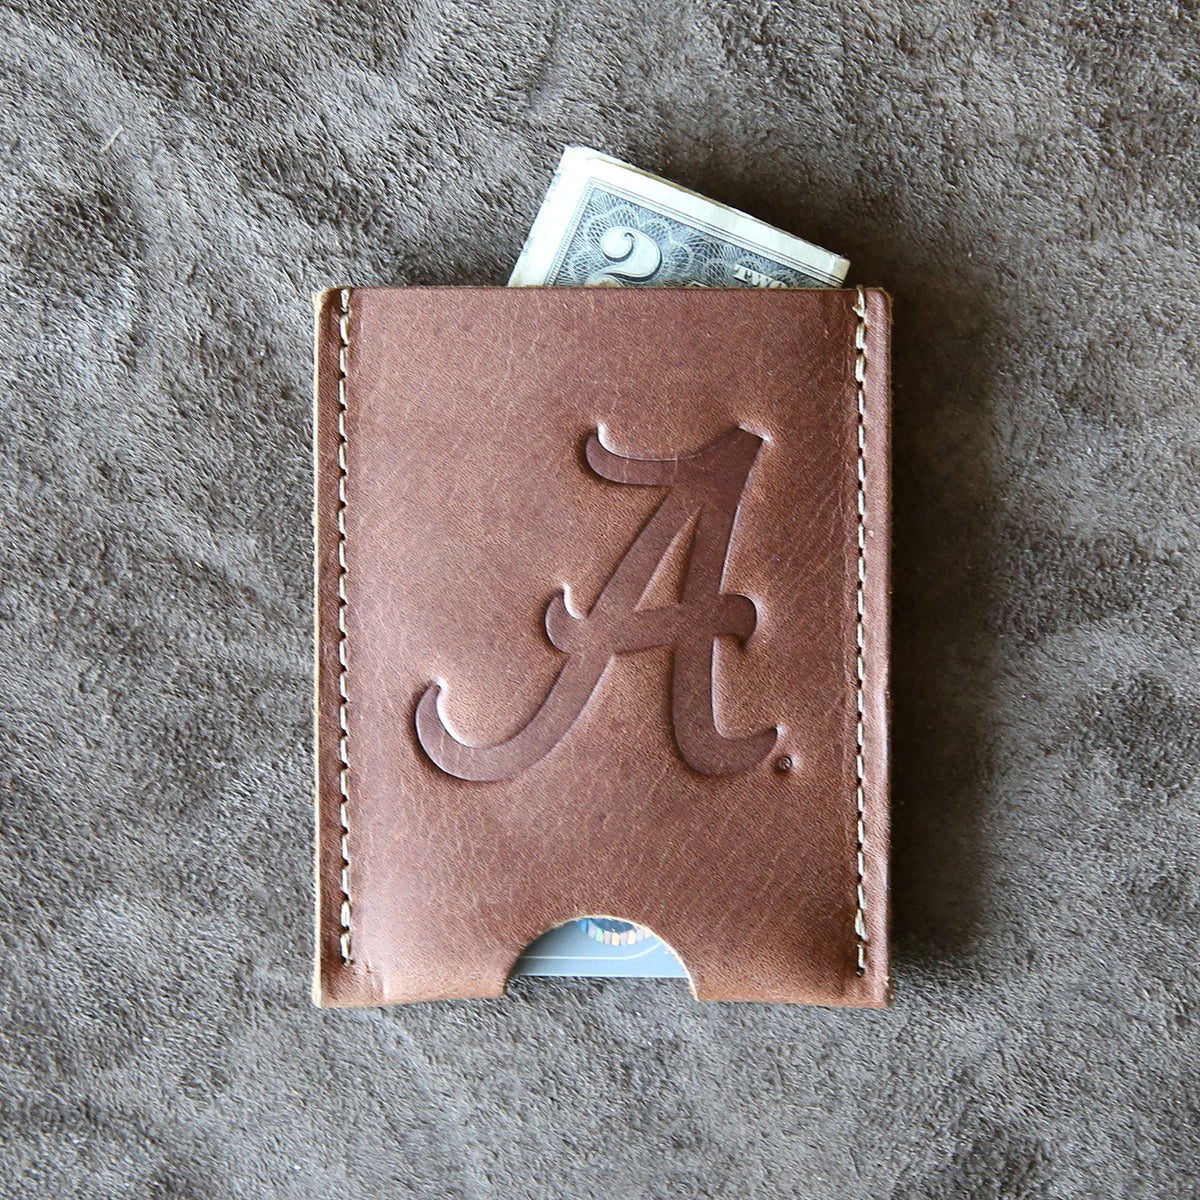 The Officially Licensed Alabama Jefferson Personalized Fine Leather Card Holder Wallet